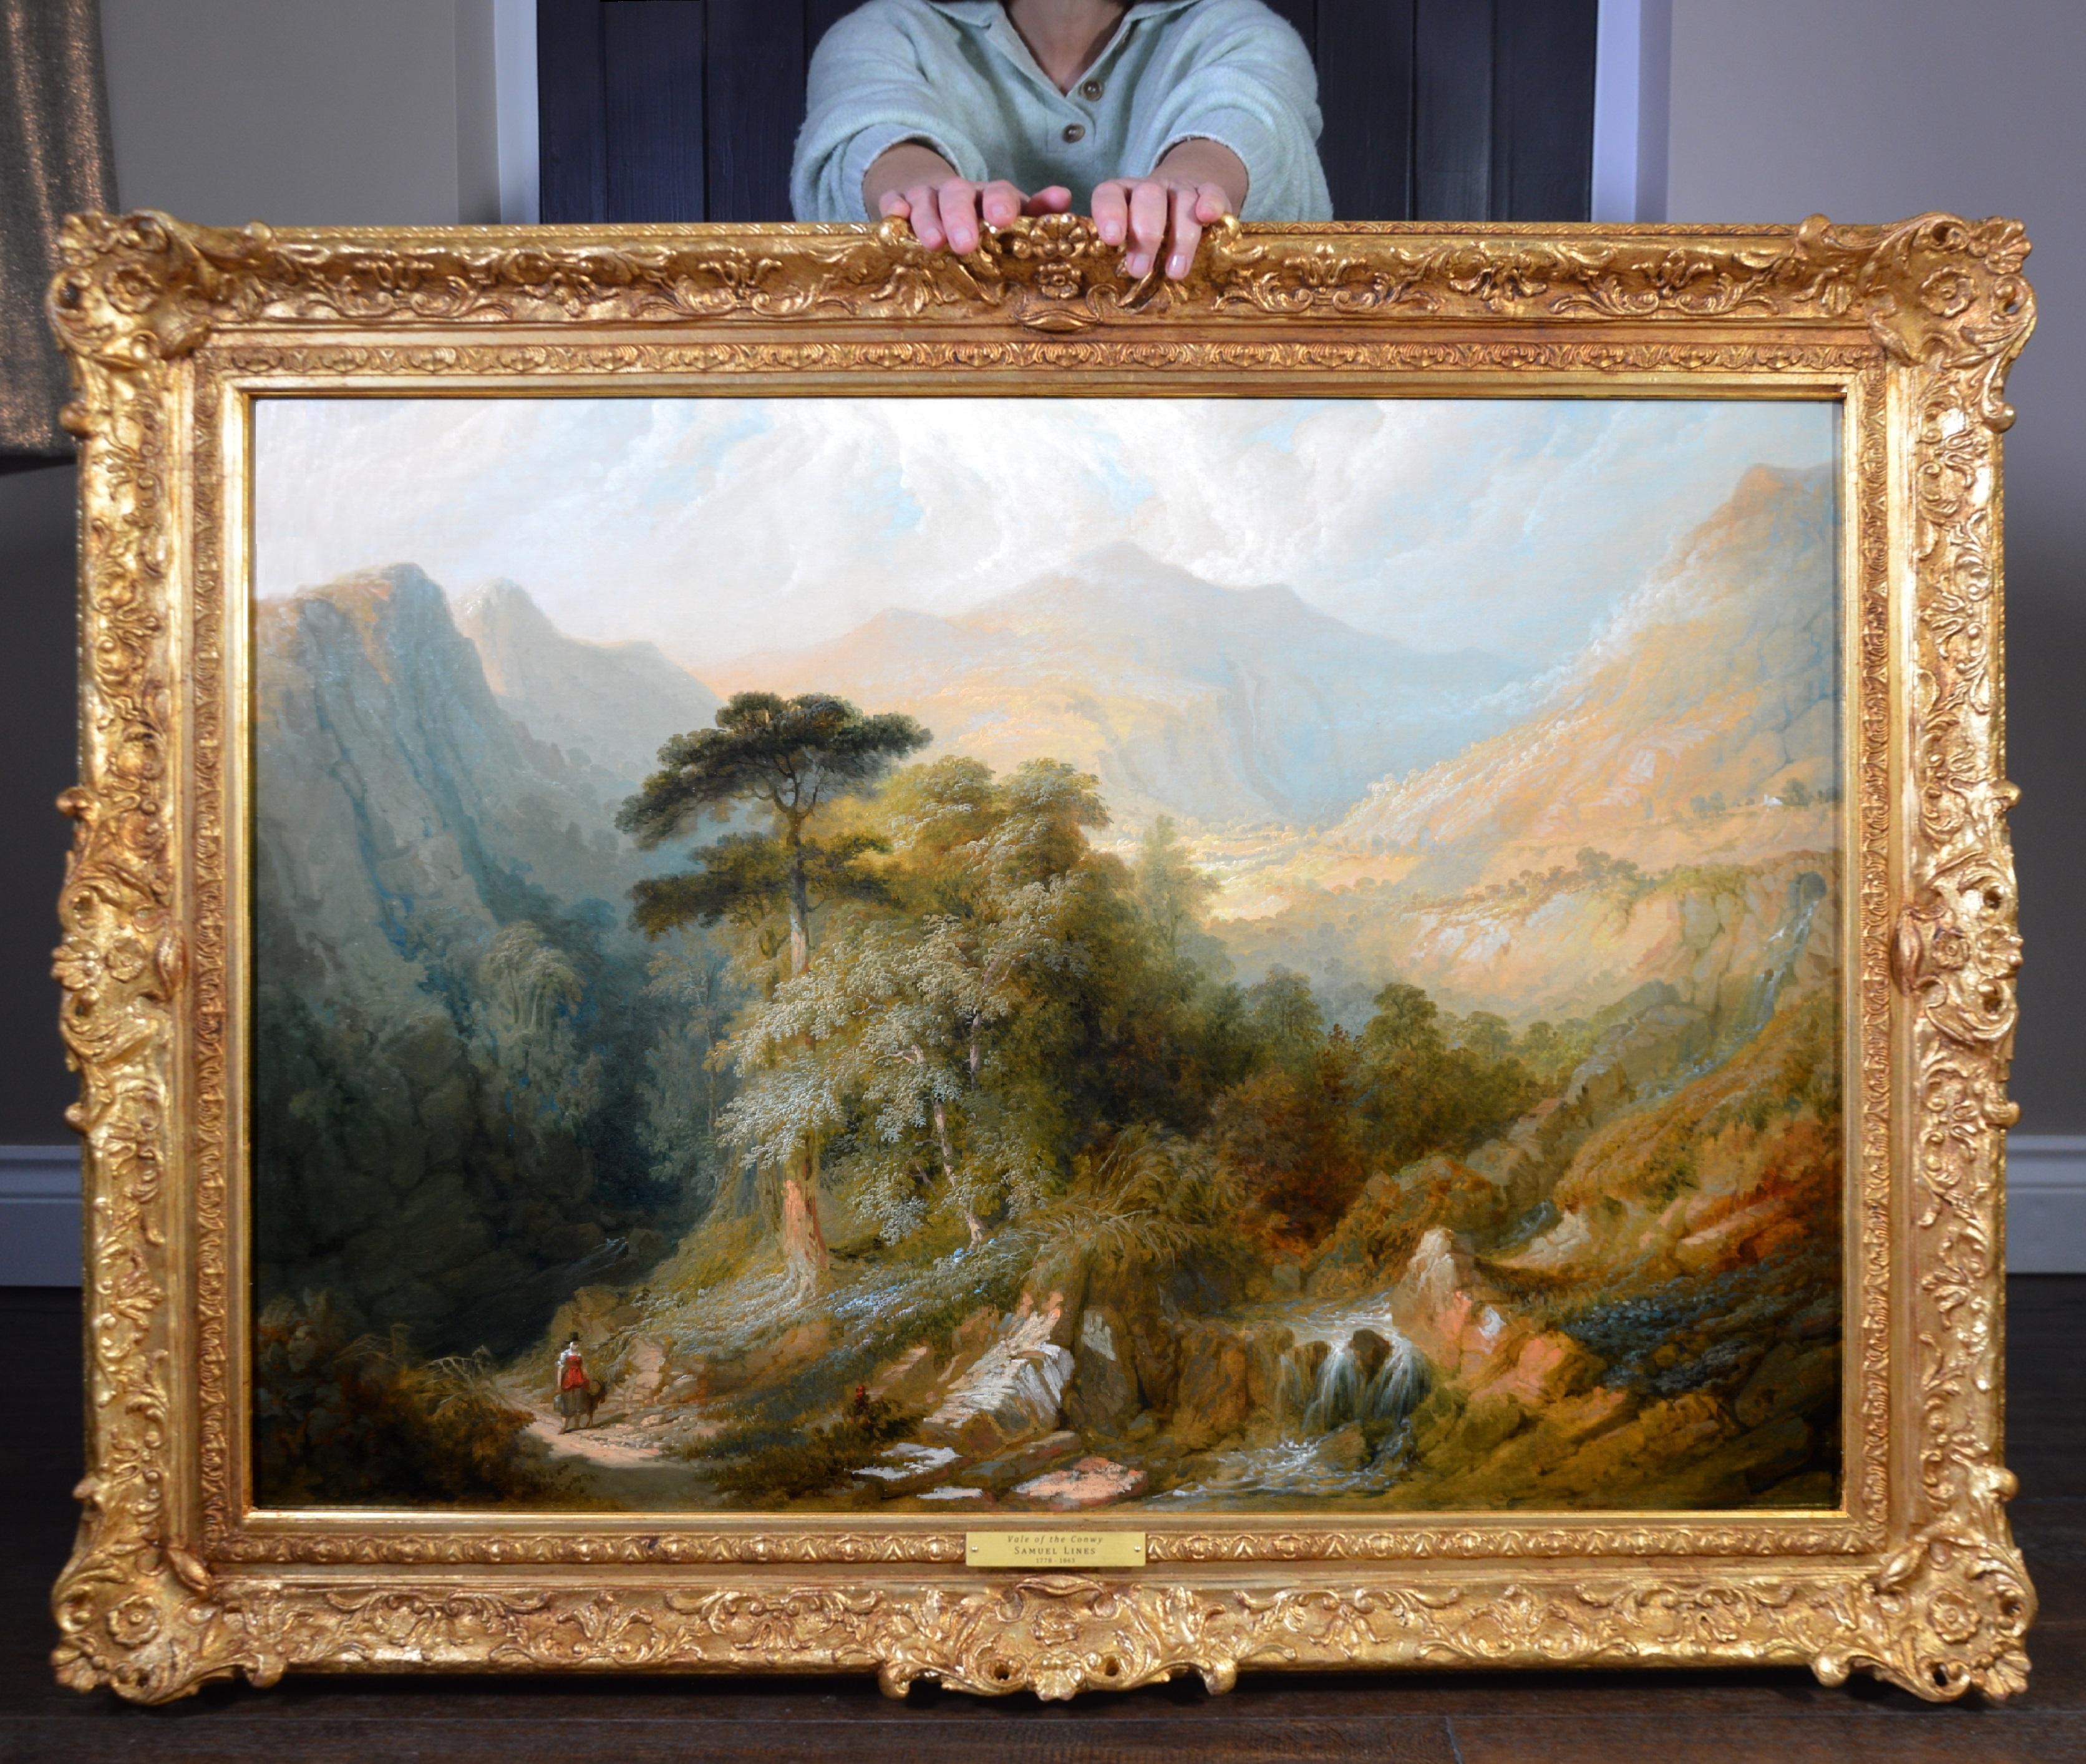 Samuel Lines Figurative Painting - Vale of the Conwy, Snowdonia - Large 19th Century Welsh Landscape Oil Painting 